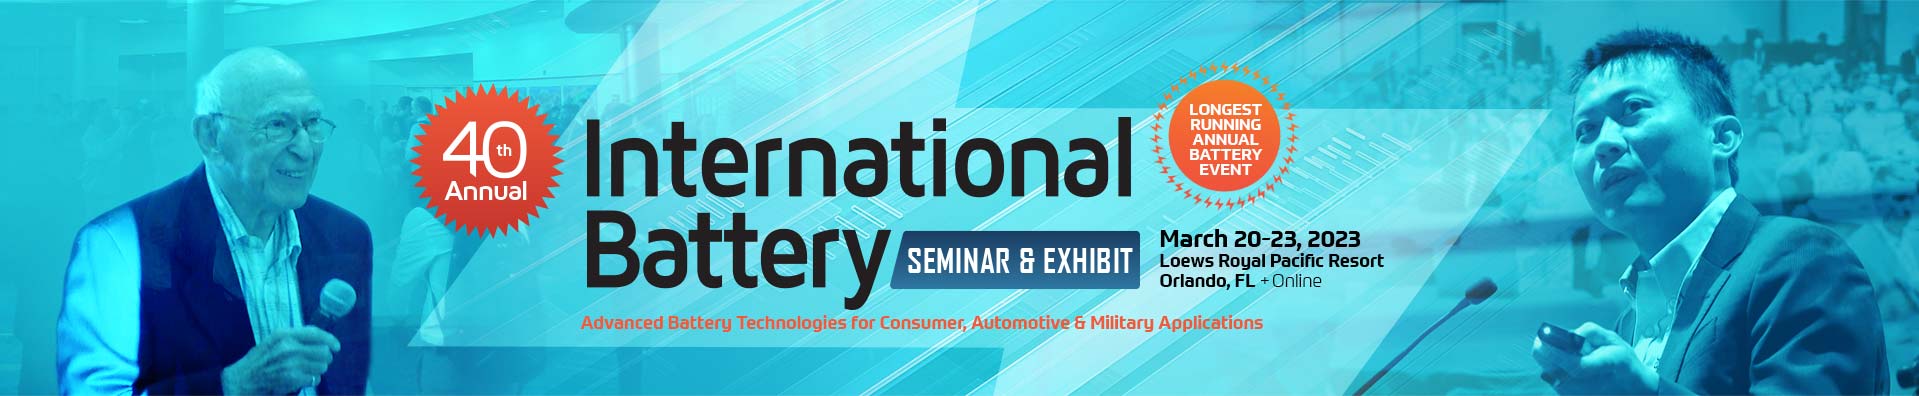 International Battery Conference Siminar and Exhibit - March 21-23, 2023 - Orlando, FL